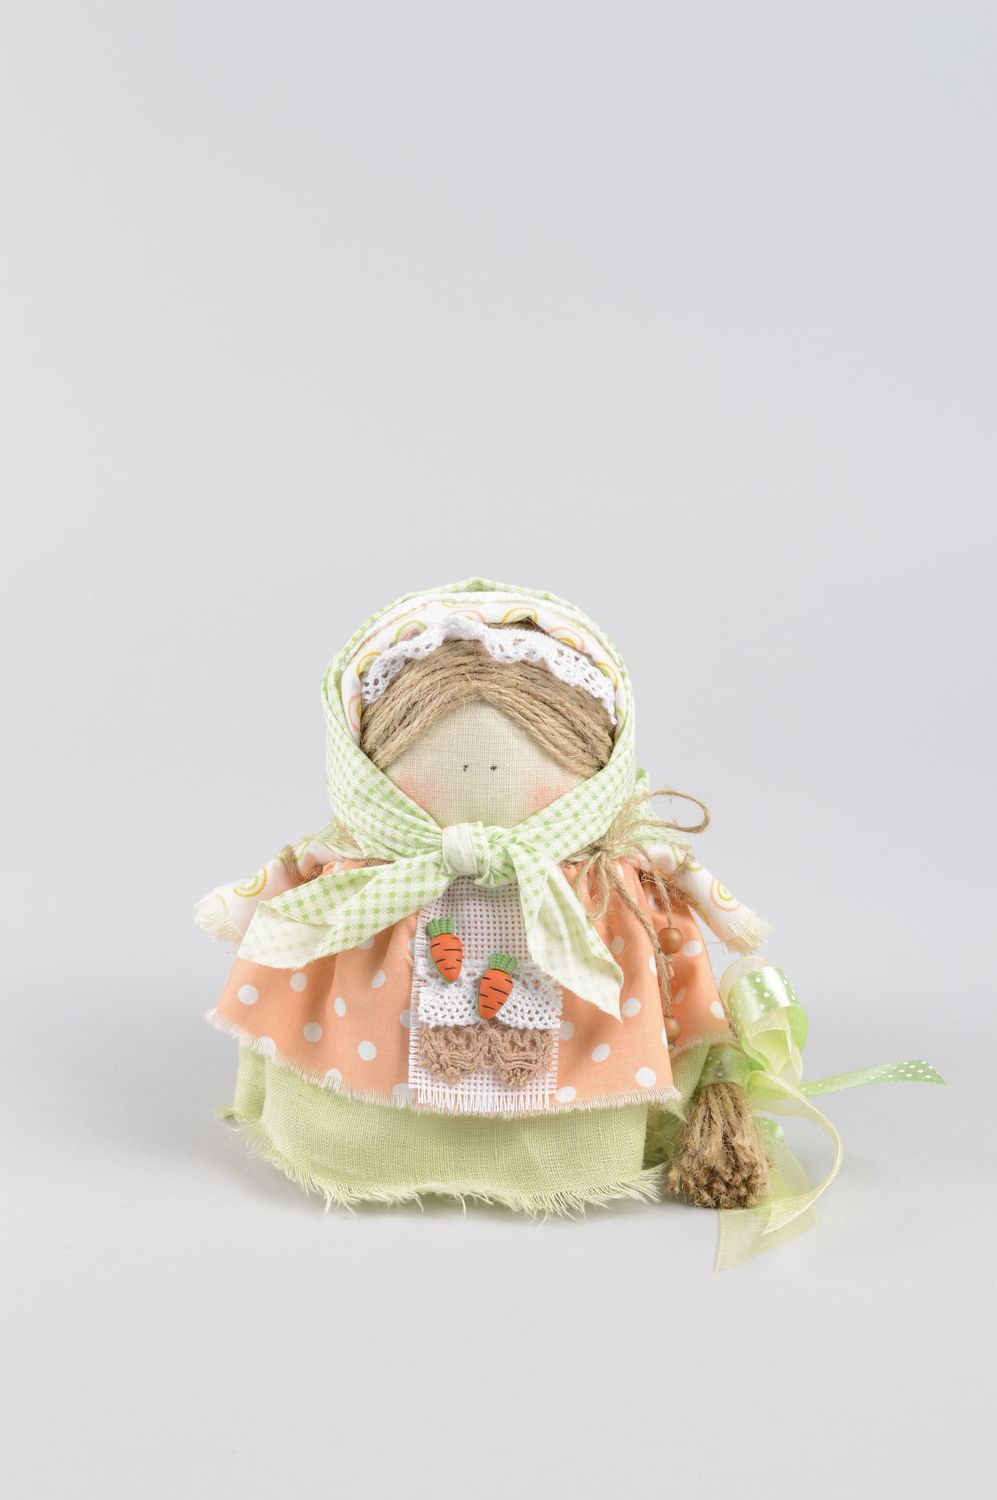 Handmade doll decor ideas decorative use only unusual gift for children photo 1